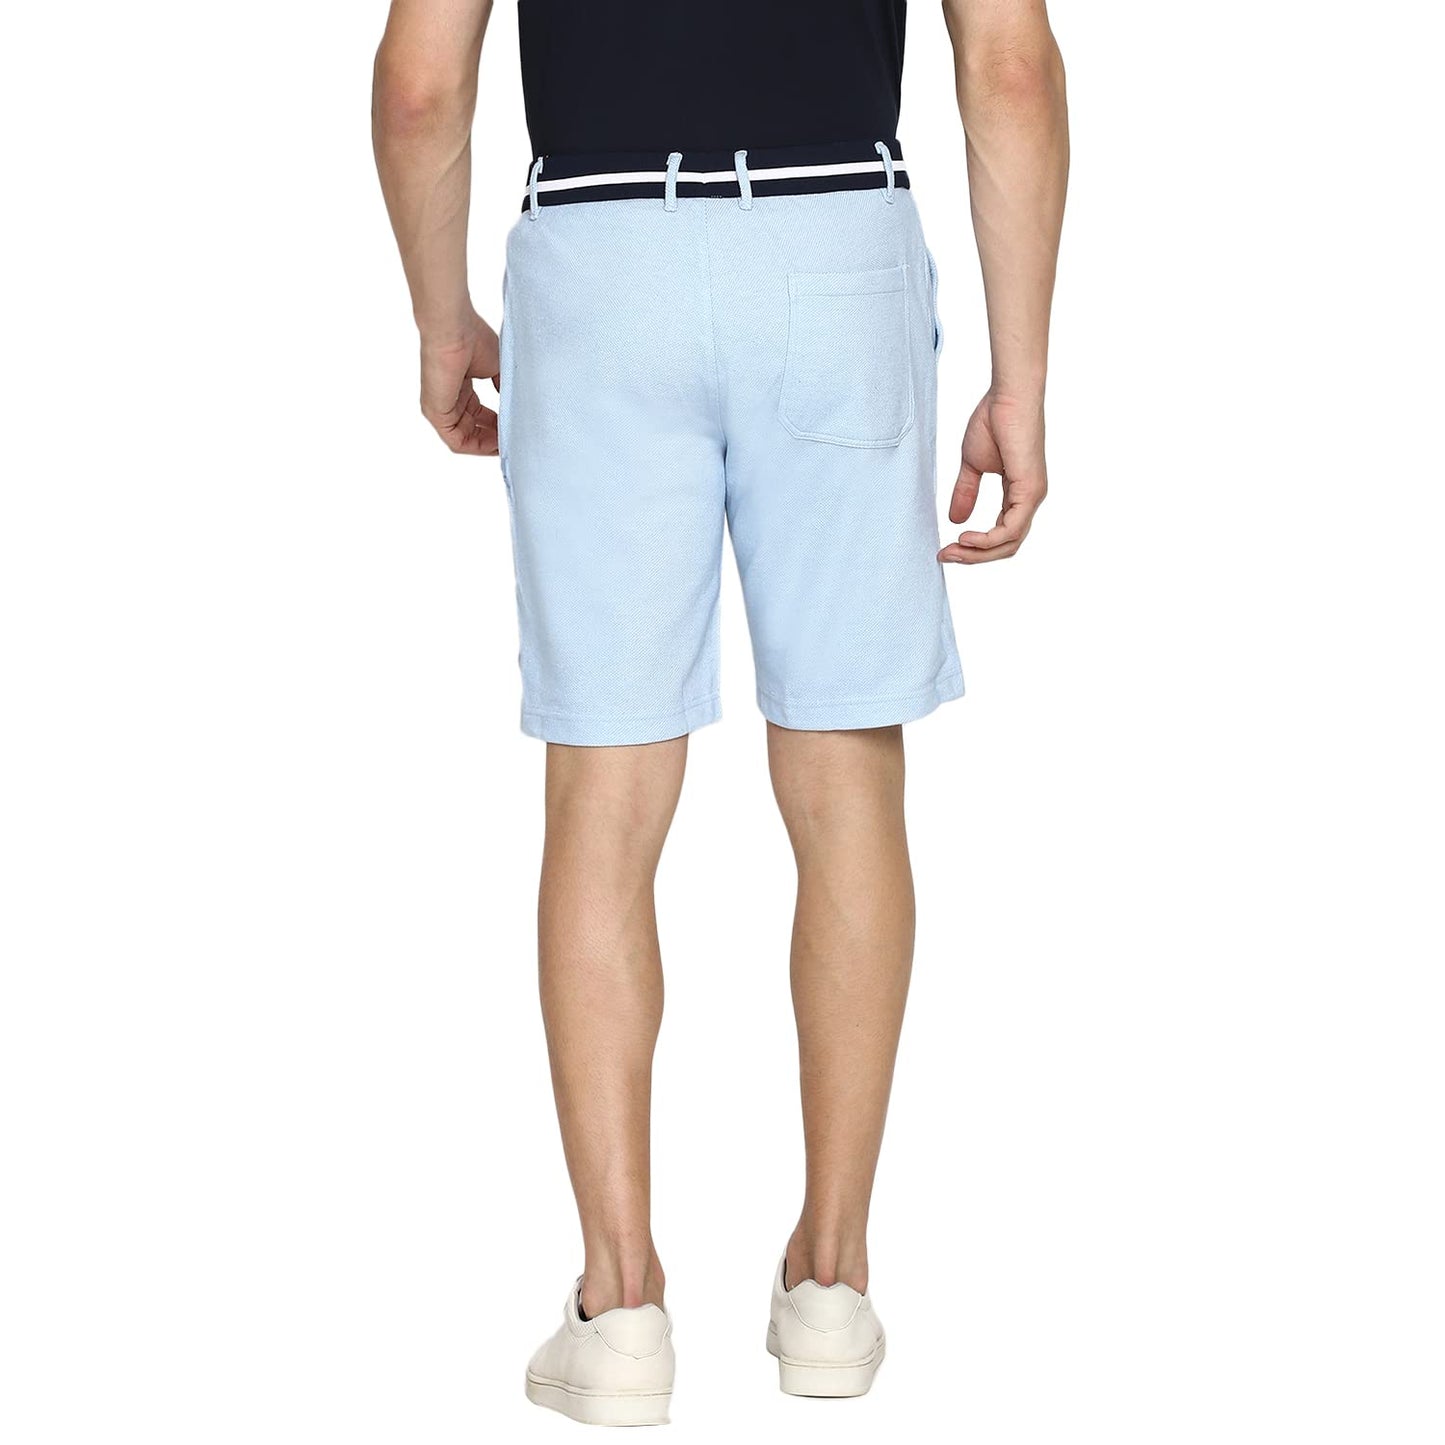 Van Heusen Men Athleisure Functional Pocket Chino Shorts - Soft Touch, Breathable_50009_Sky Blue_L